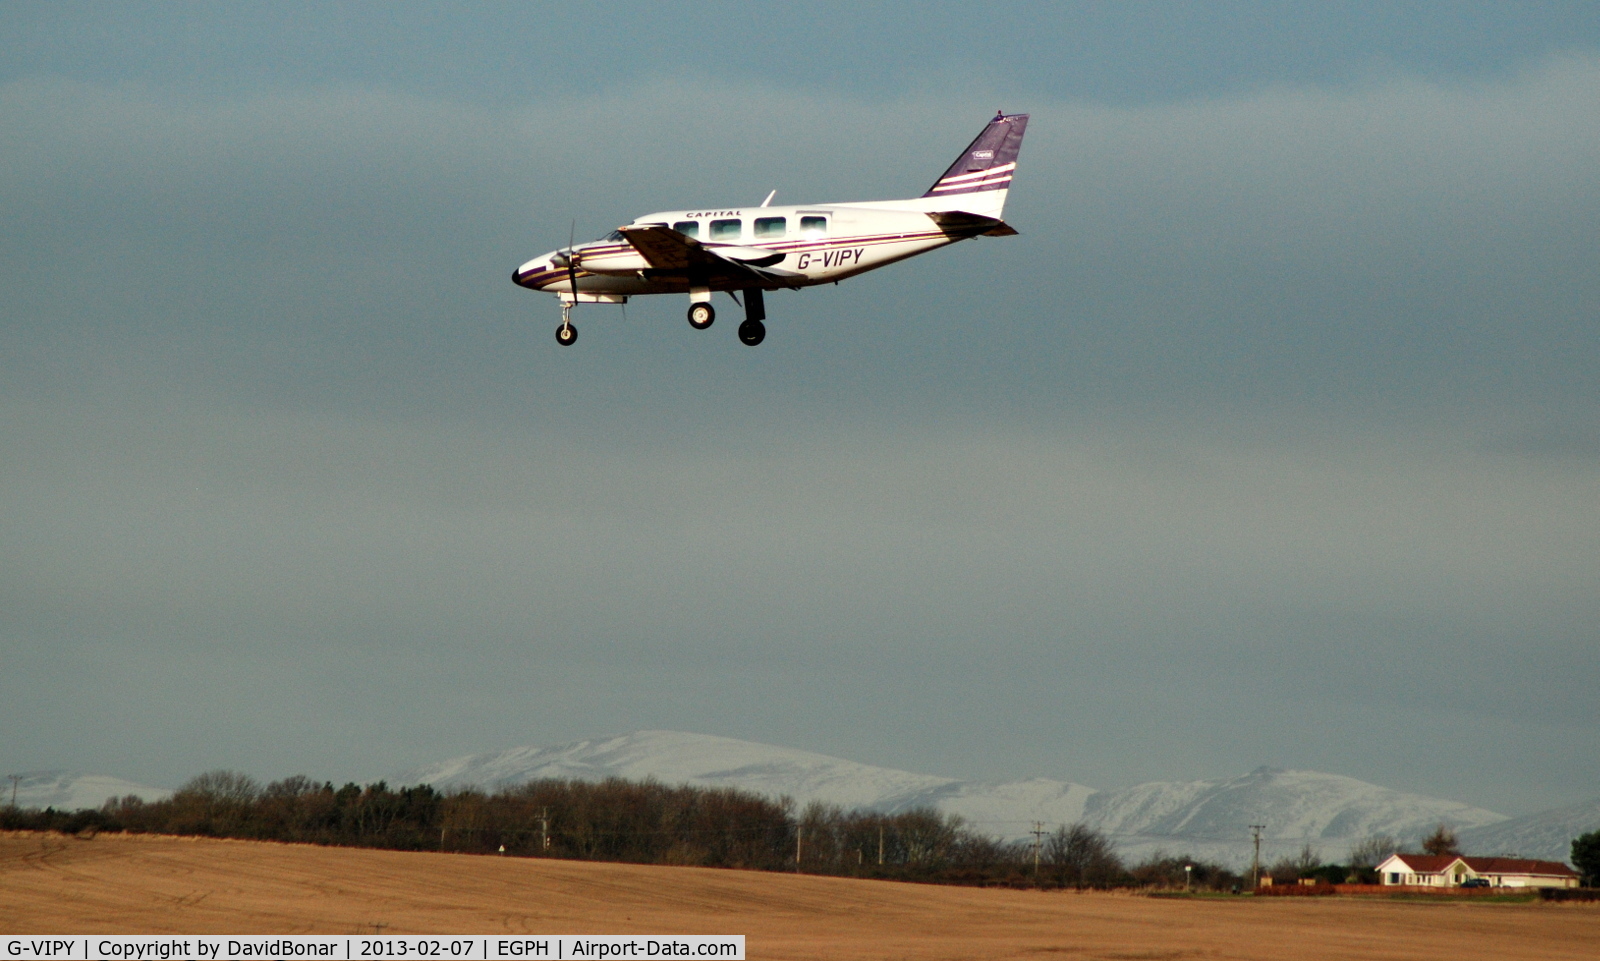 G-VIPY, 1978 Piper PA-31-350 Chieftain C/N 31-7852143, Capital Aviation Navajo's are regular visitors to Edinburgh. Seen here on short finals on a cold February morning.